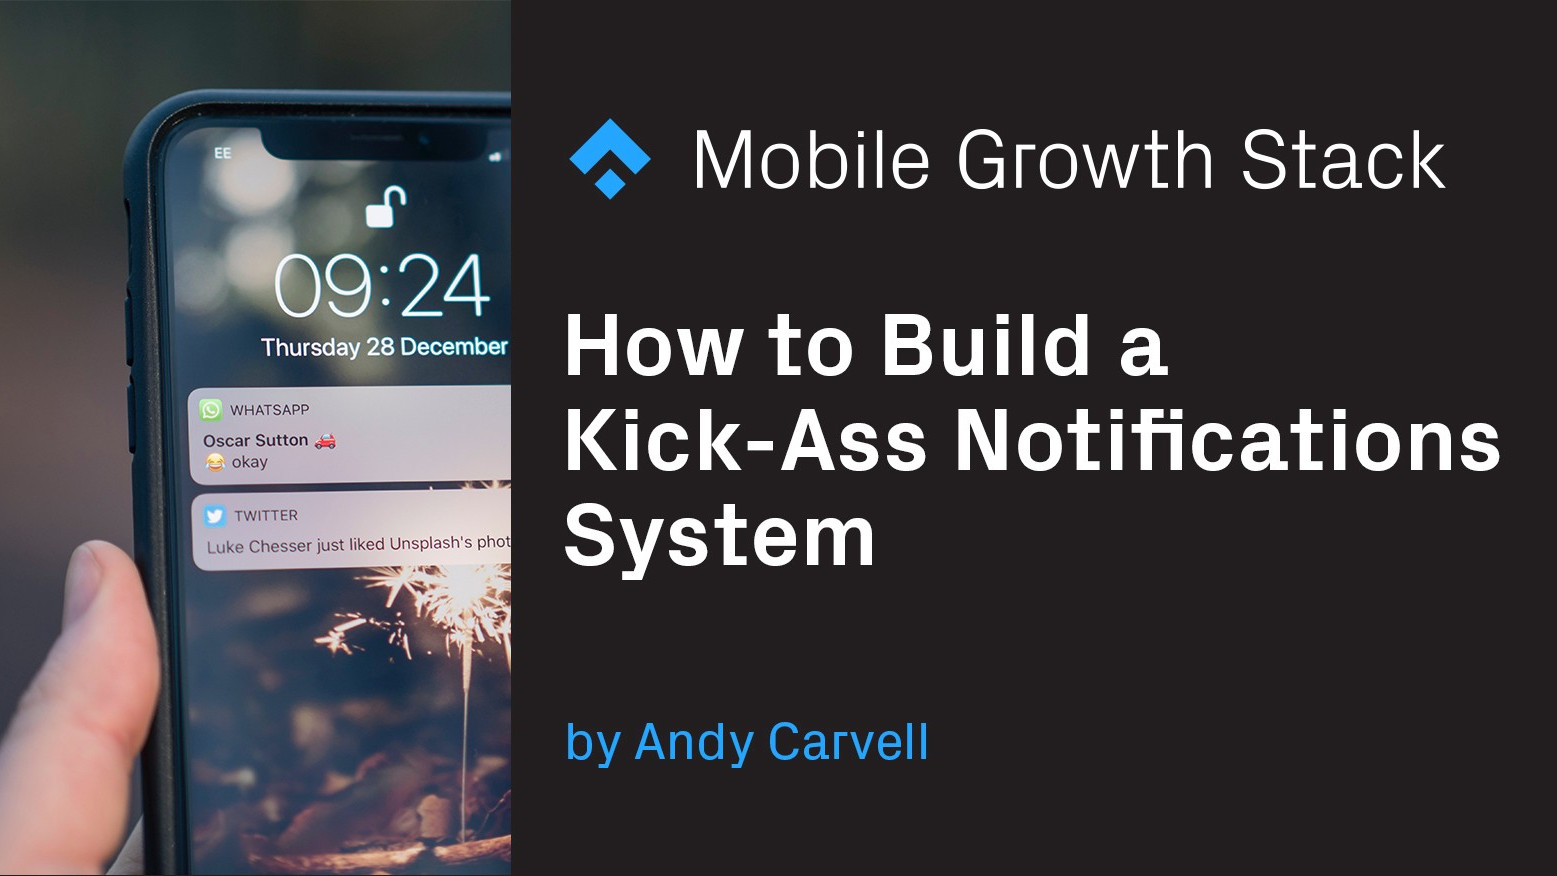 How to Build a Kick-Ass Notifications System